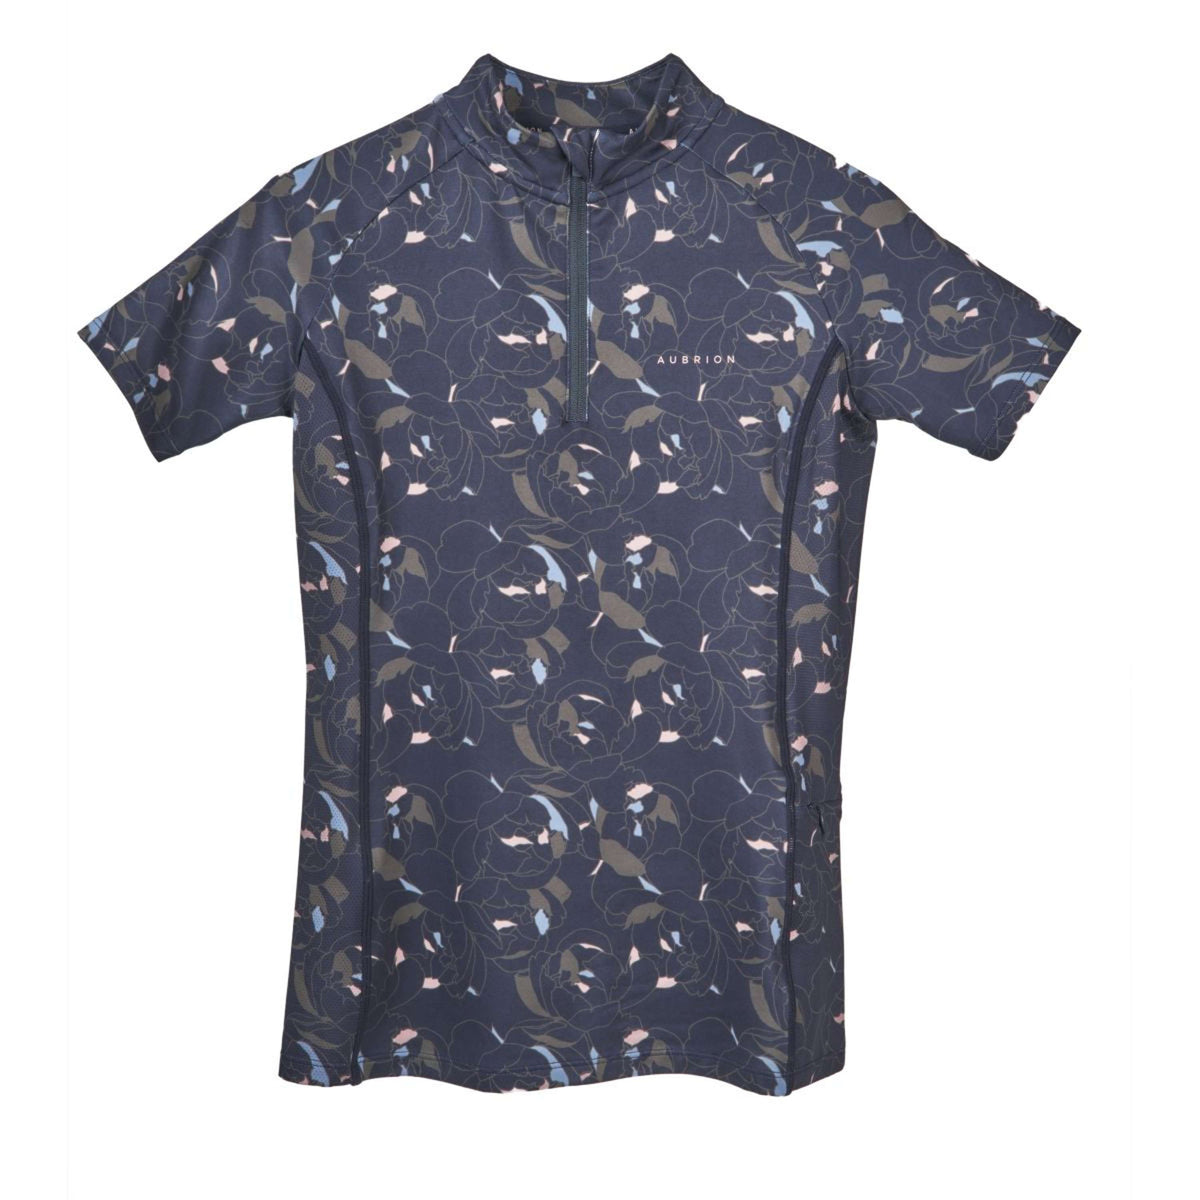 Aubrion by Shires T-Shirt Revive Young Rider Peony Print